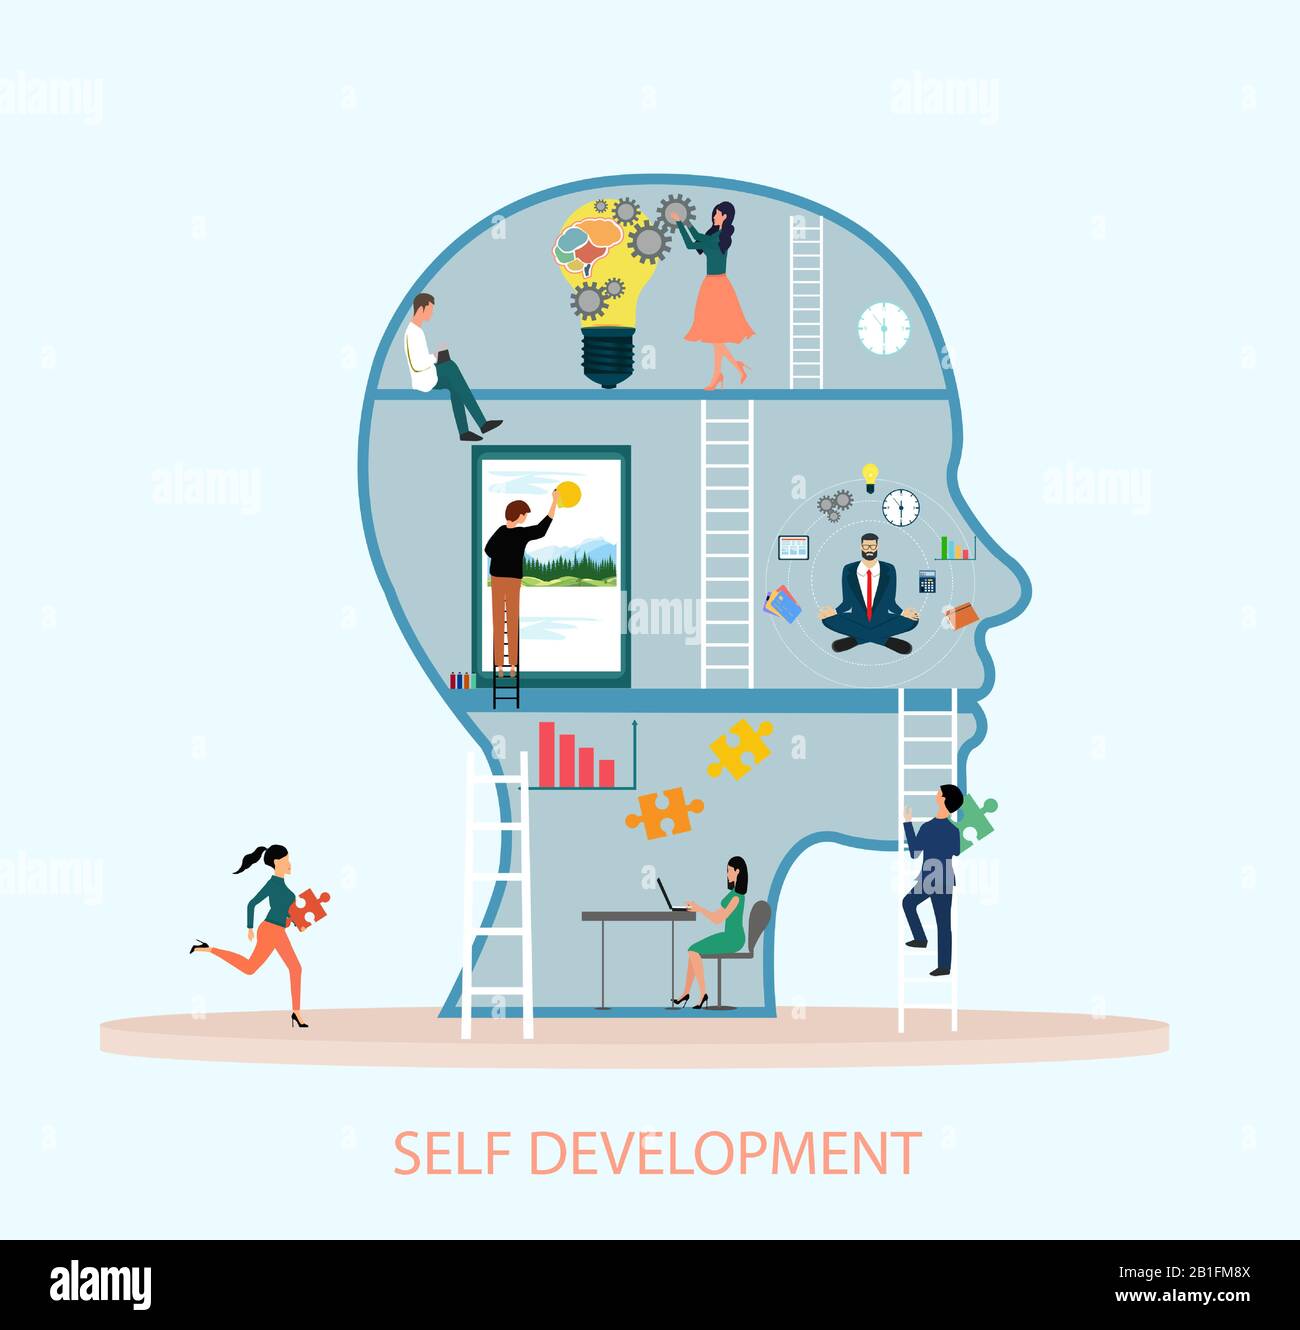 Self development concept. Vector of a group of creative people working hard on self improvement and climbing ladder of success. Stock Vector